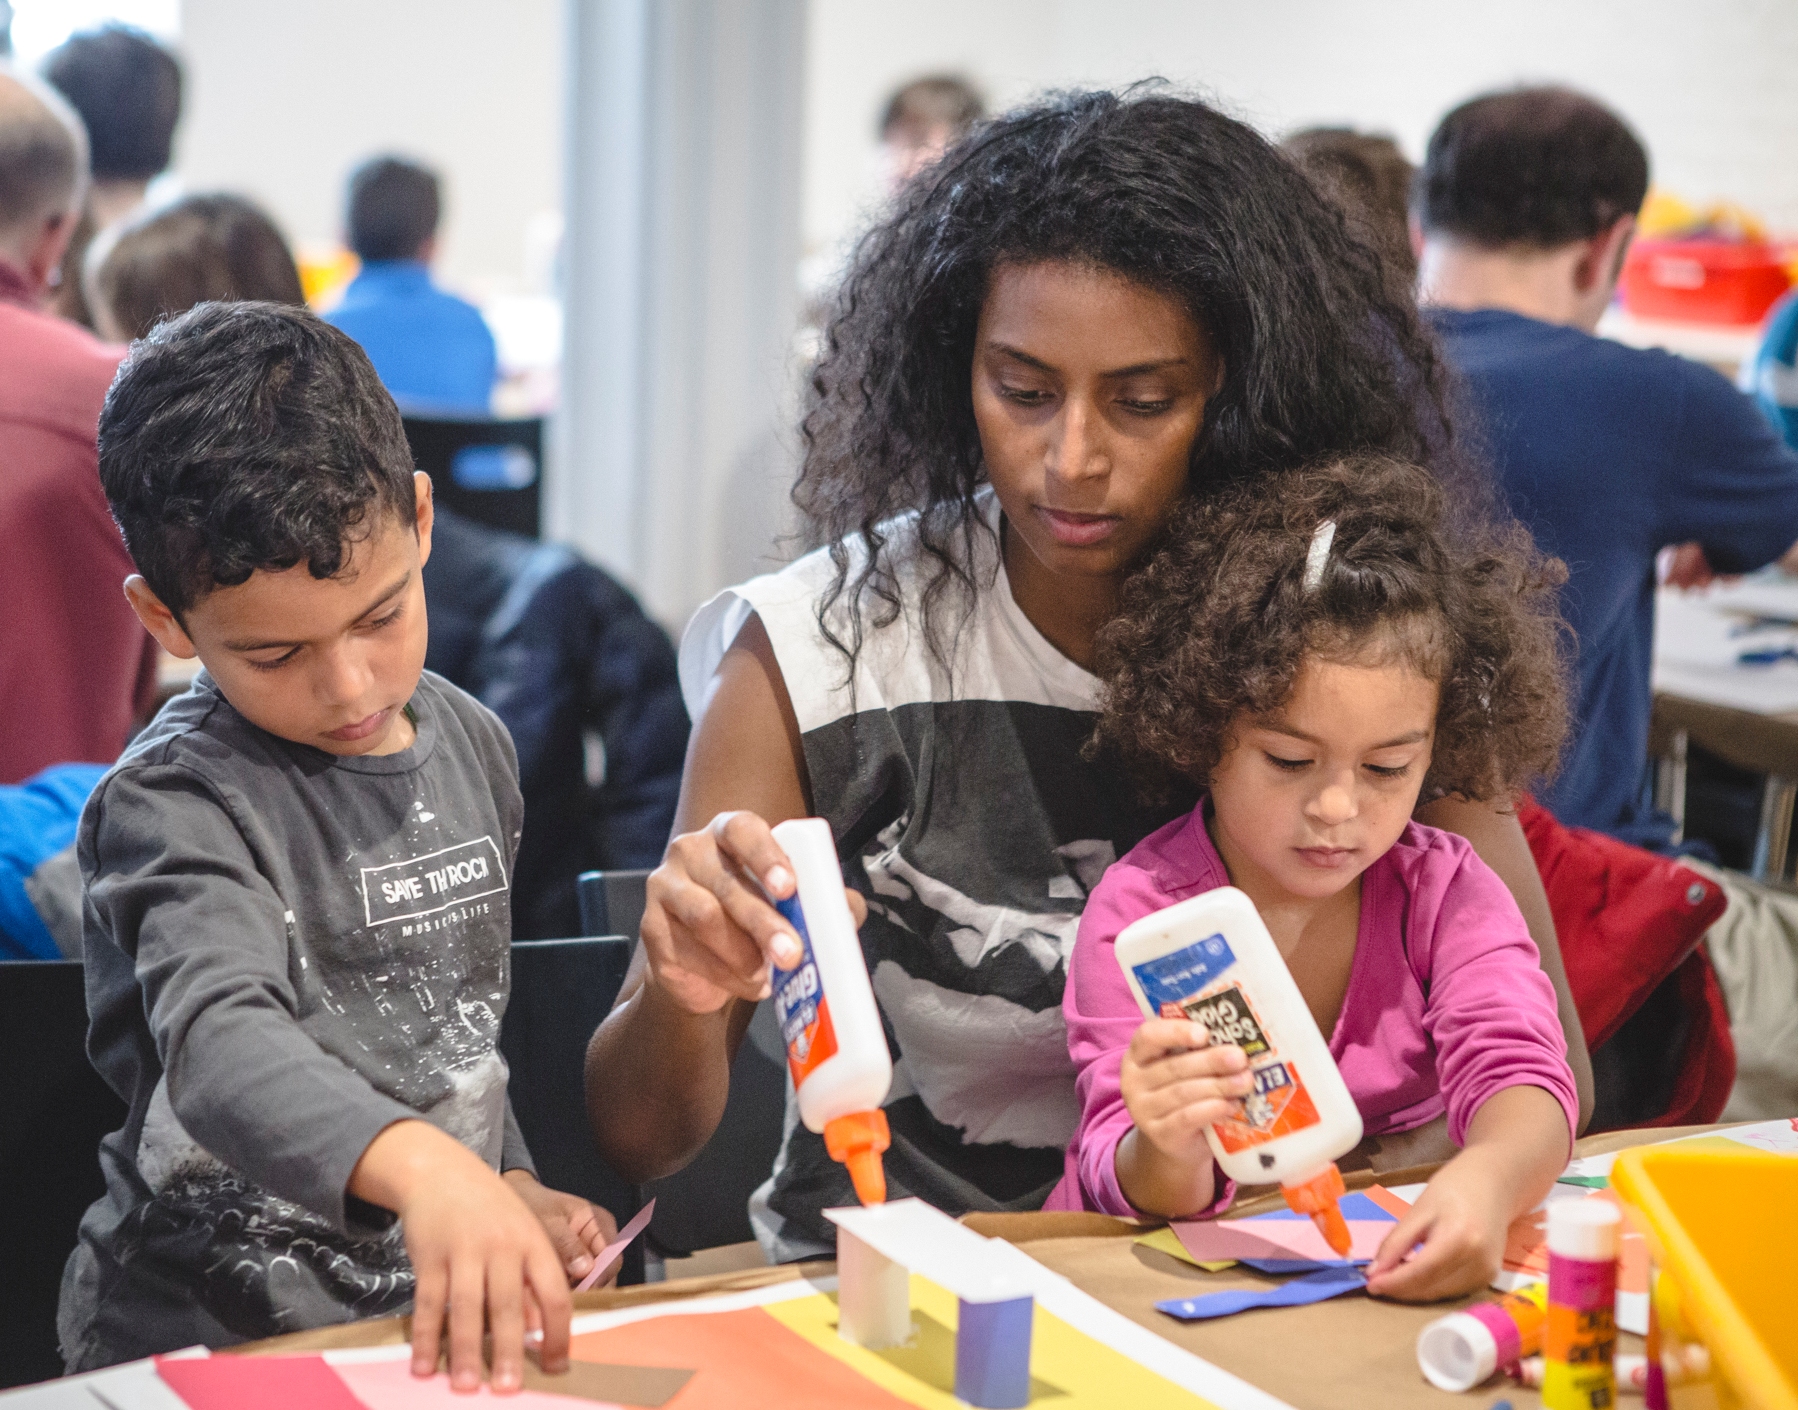 Draw, Design, Build! NYU Teams Up with the Center for Architecture for Family Programming